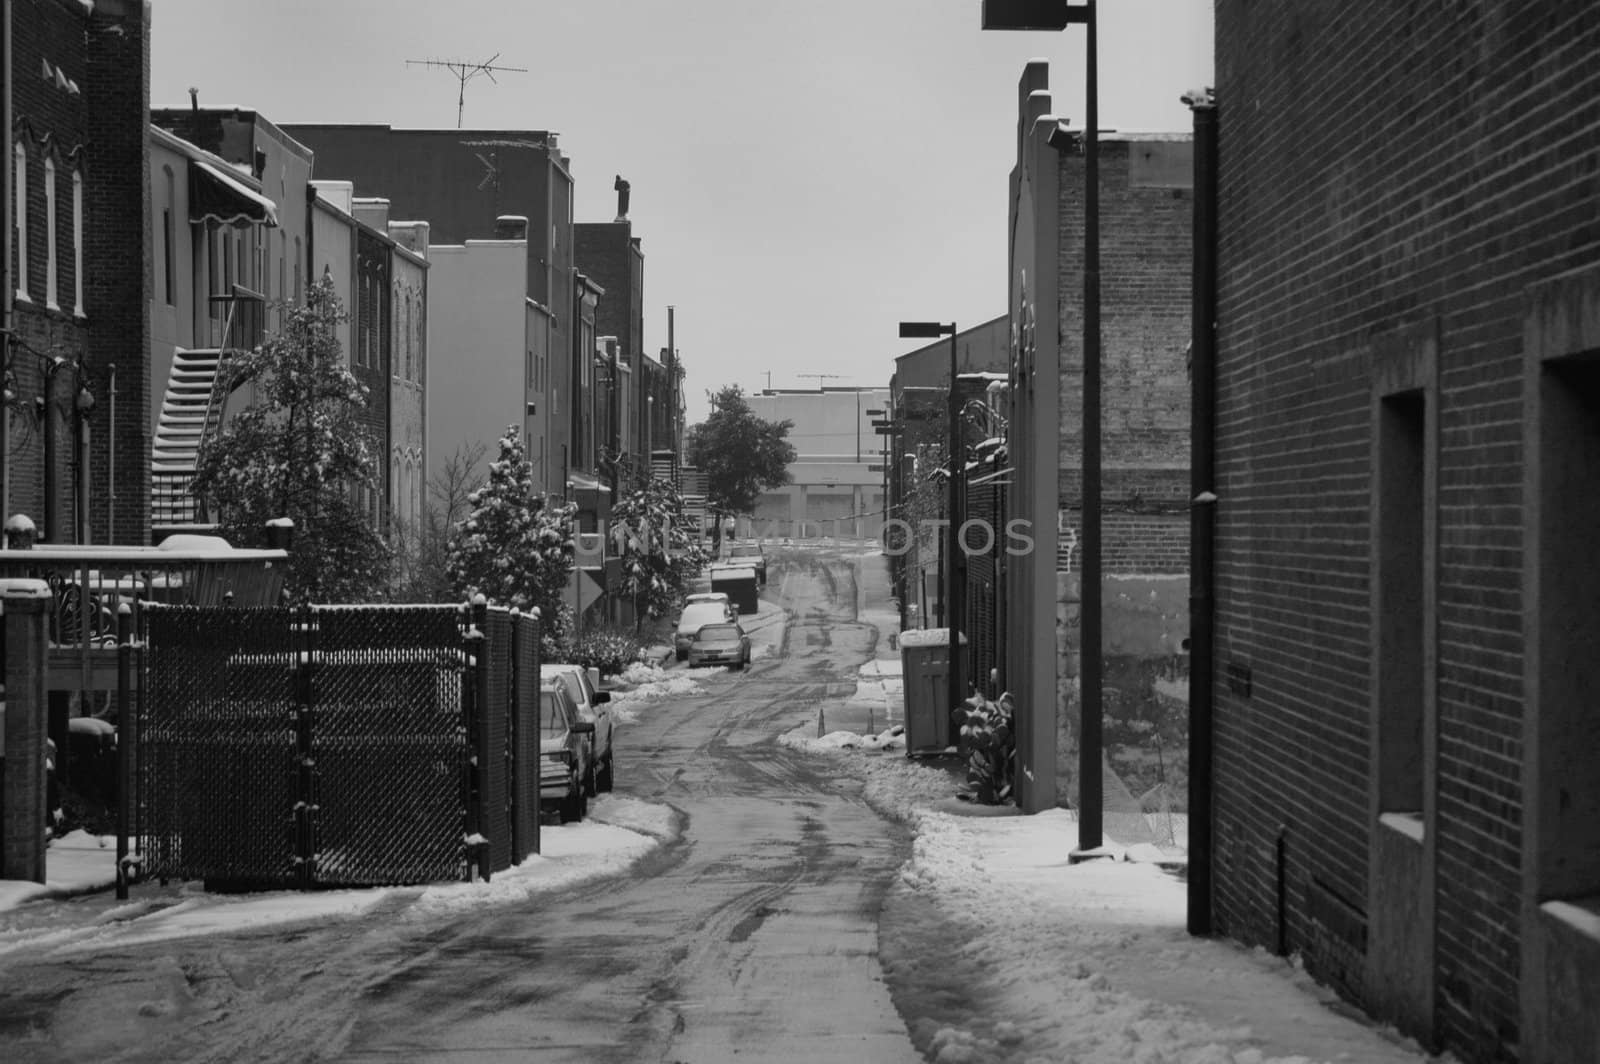 Behind every city is a back alley, This one is seen in the winter time.